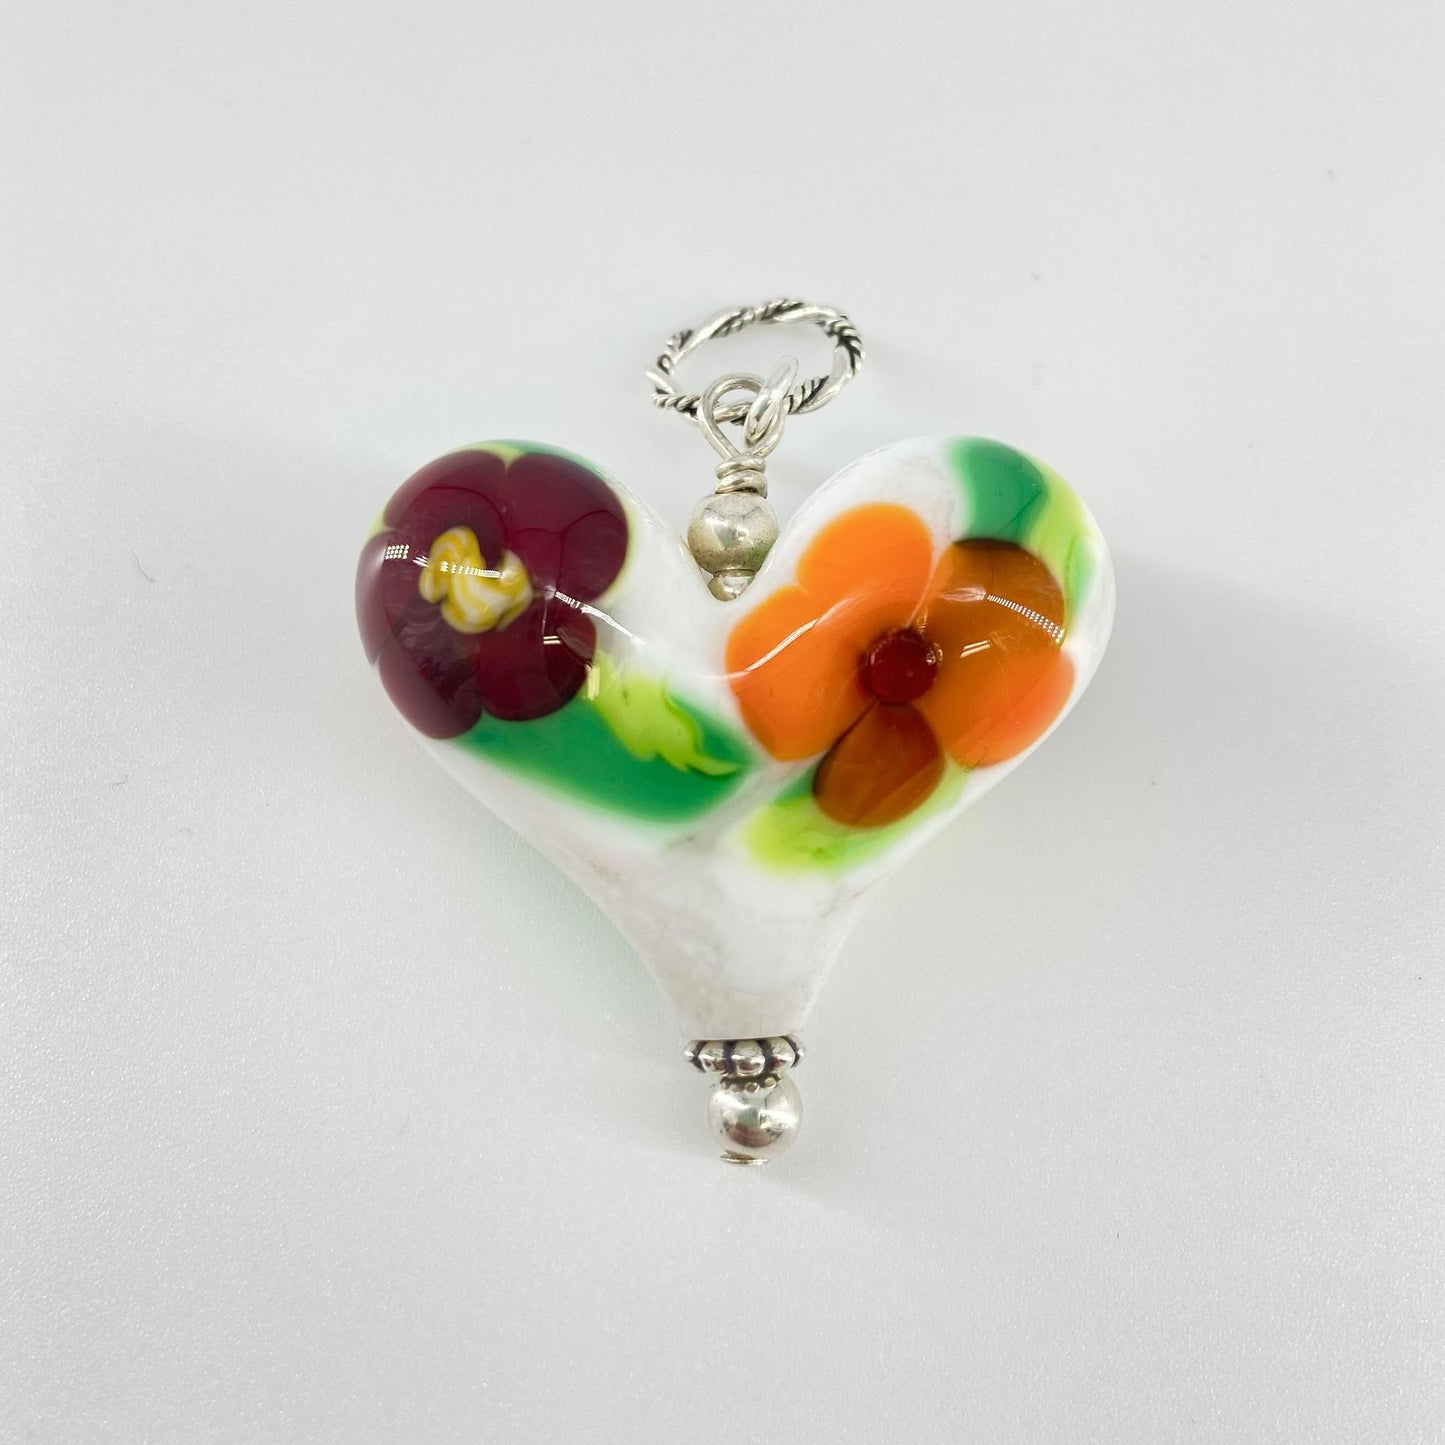 Pendant - Abstract Floral Heart - Multi on White - Handmade Glass